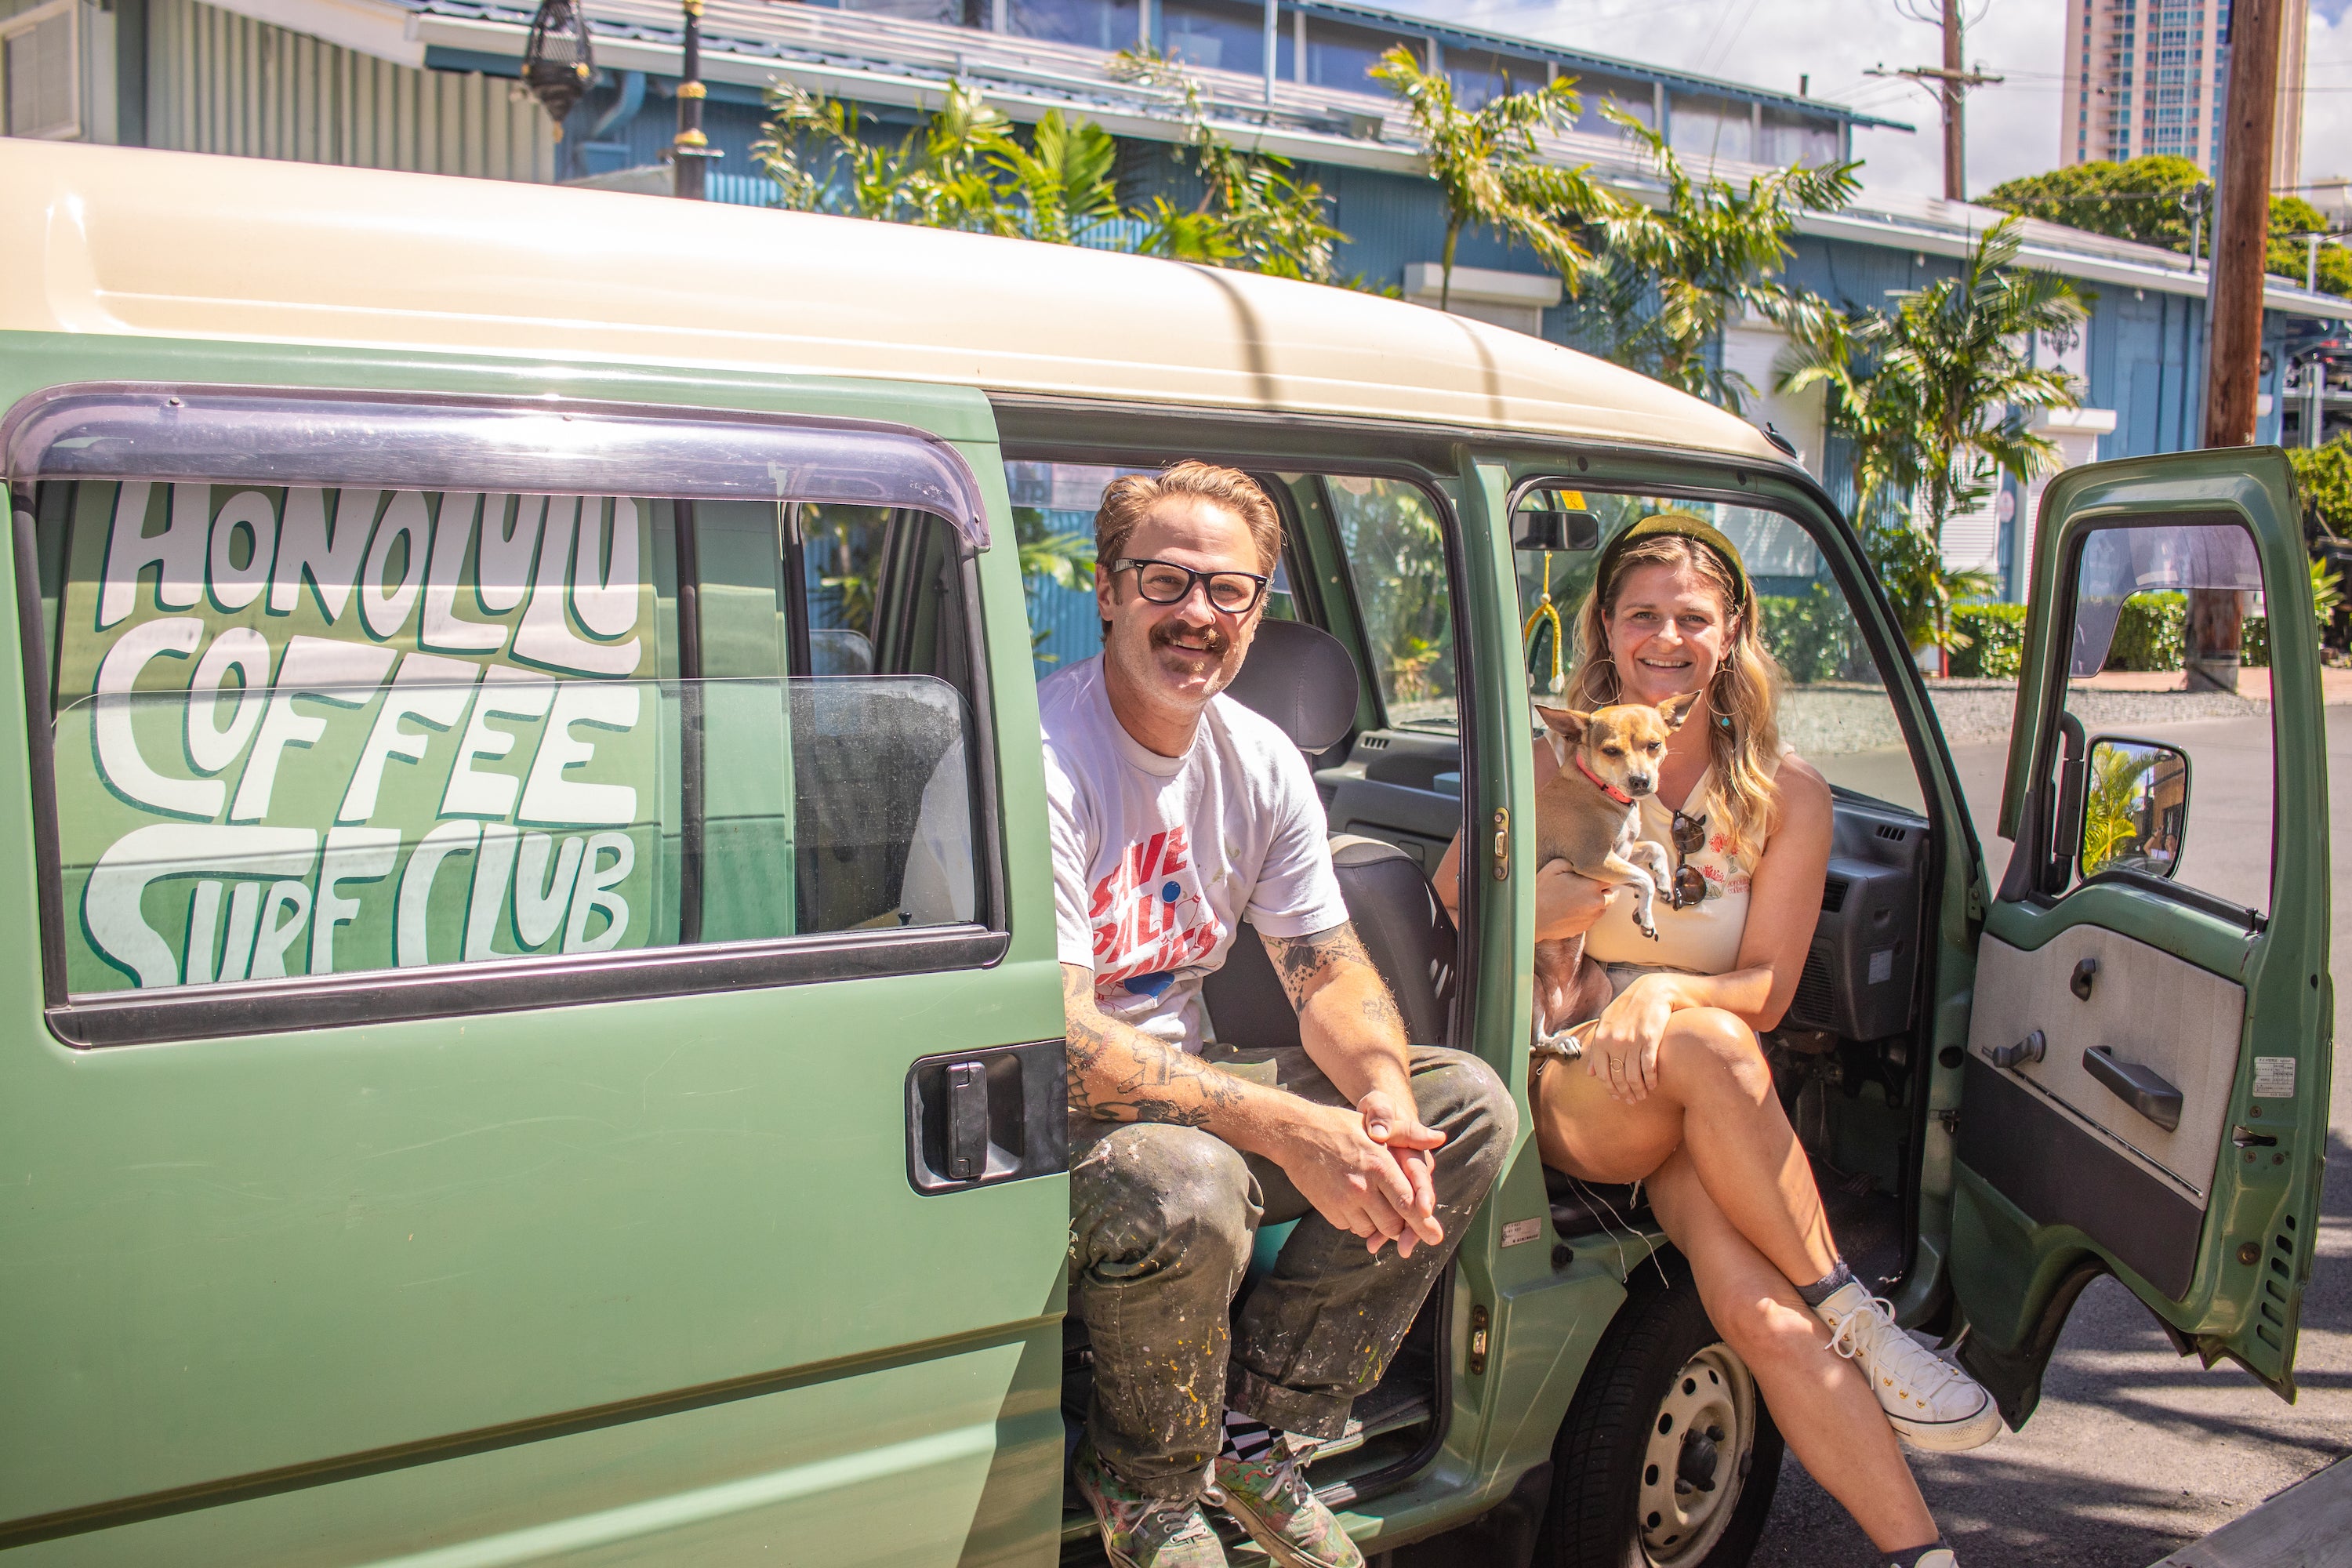 Brent Clem (of B. Clem Surfboards), Abigail Joslyn (Honolulu Coffee's COO), and Maggie Mae cruising in the Sue Brew